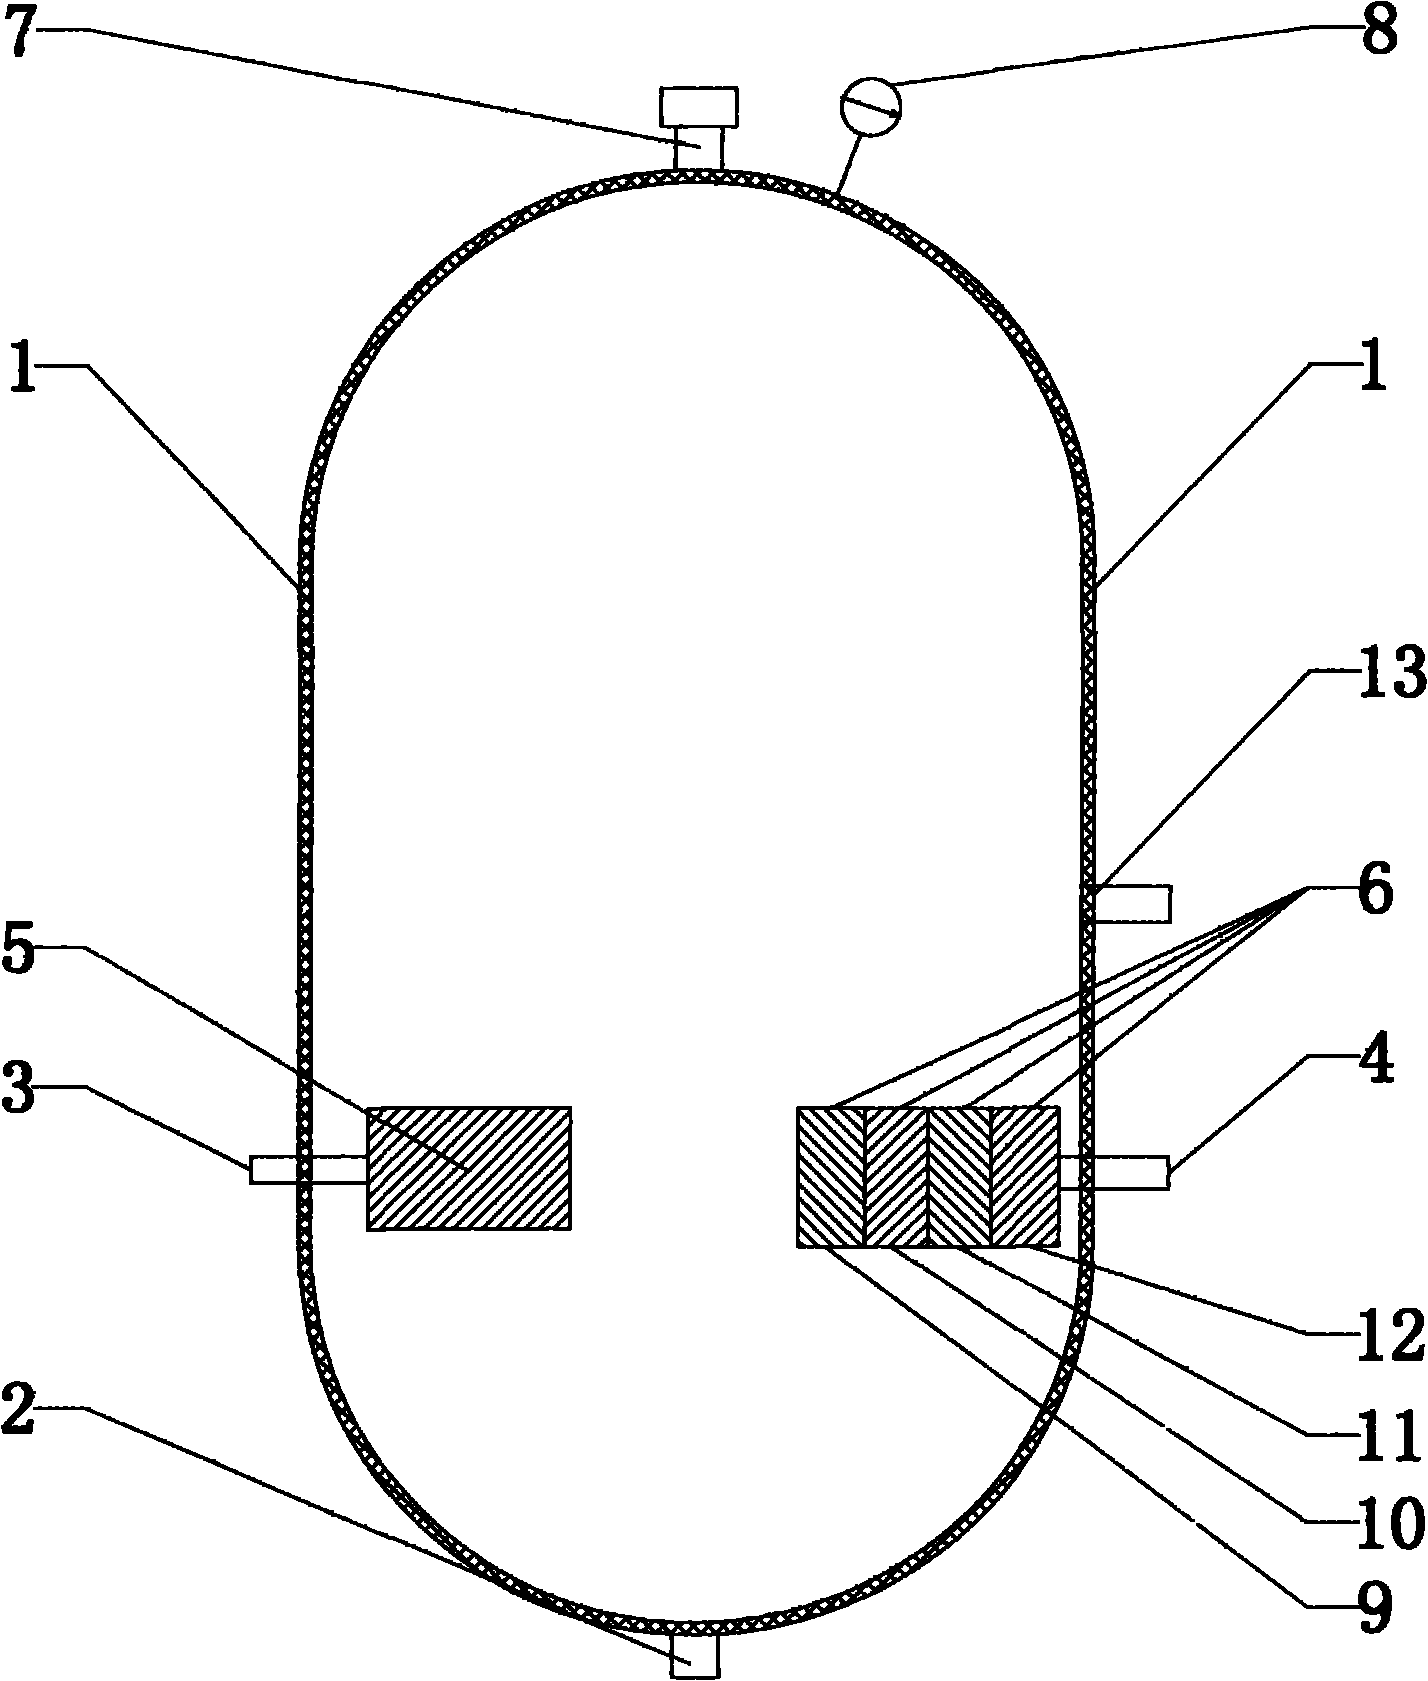 Water supply pressure container with built-in purifying and filtering device